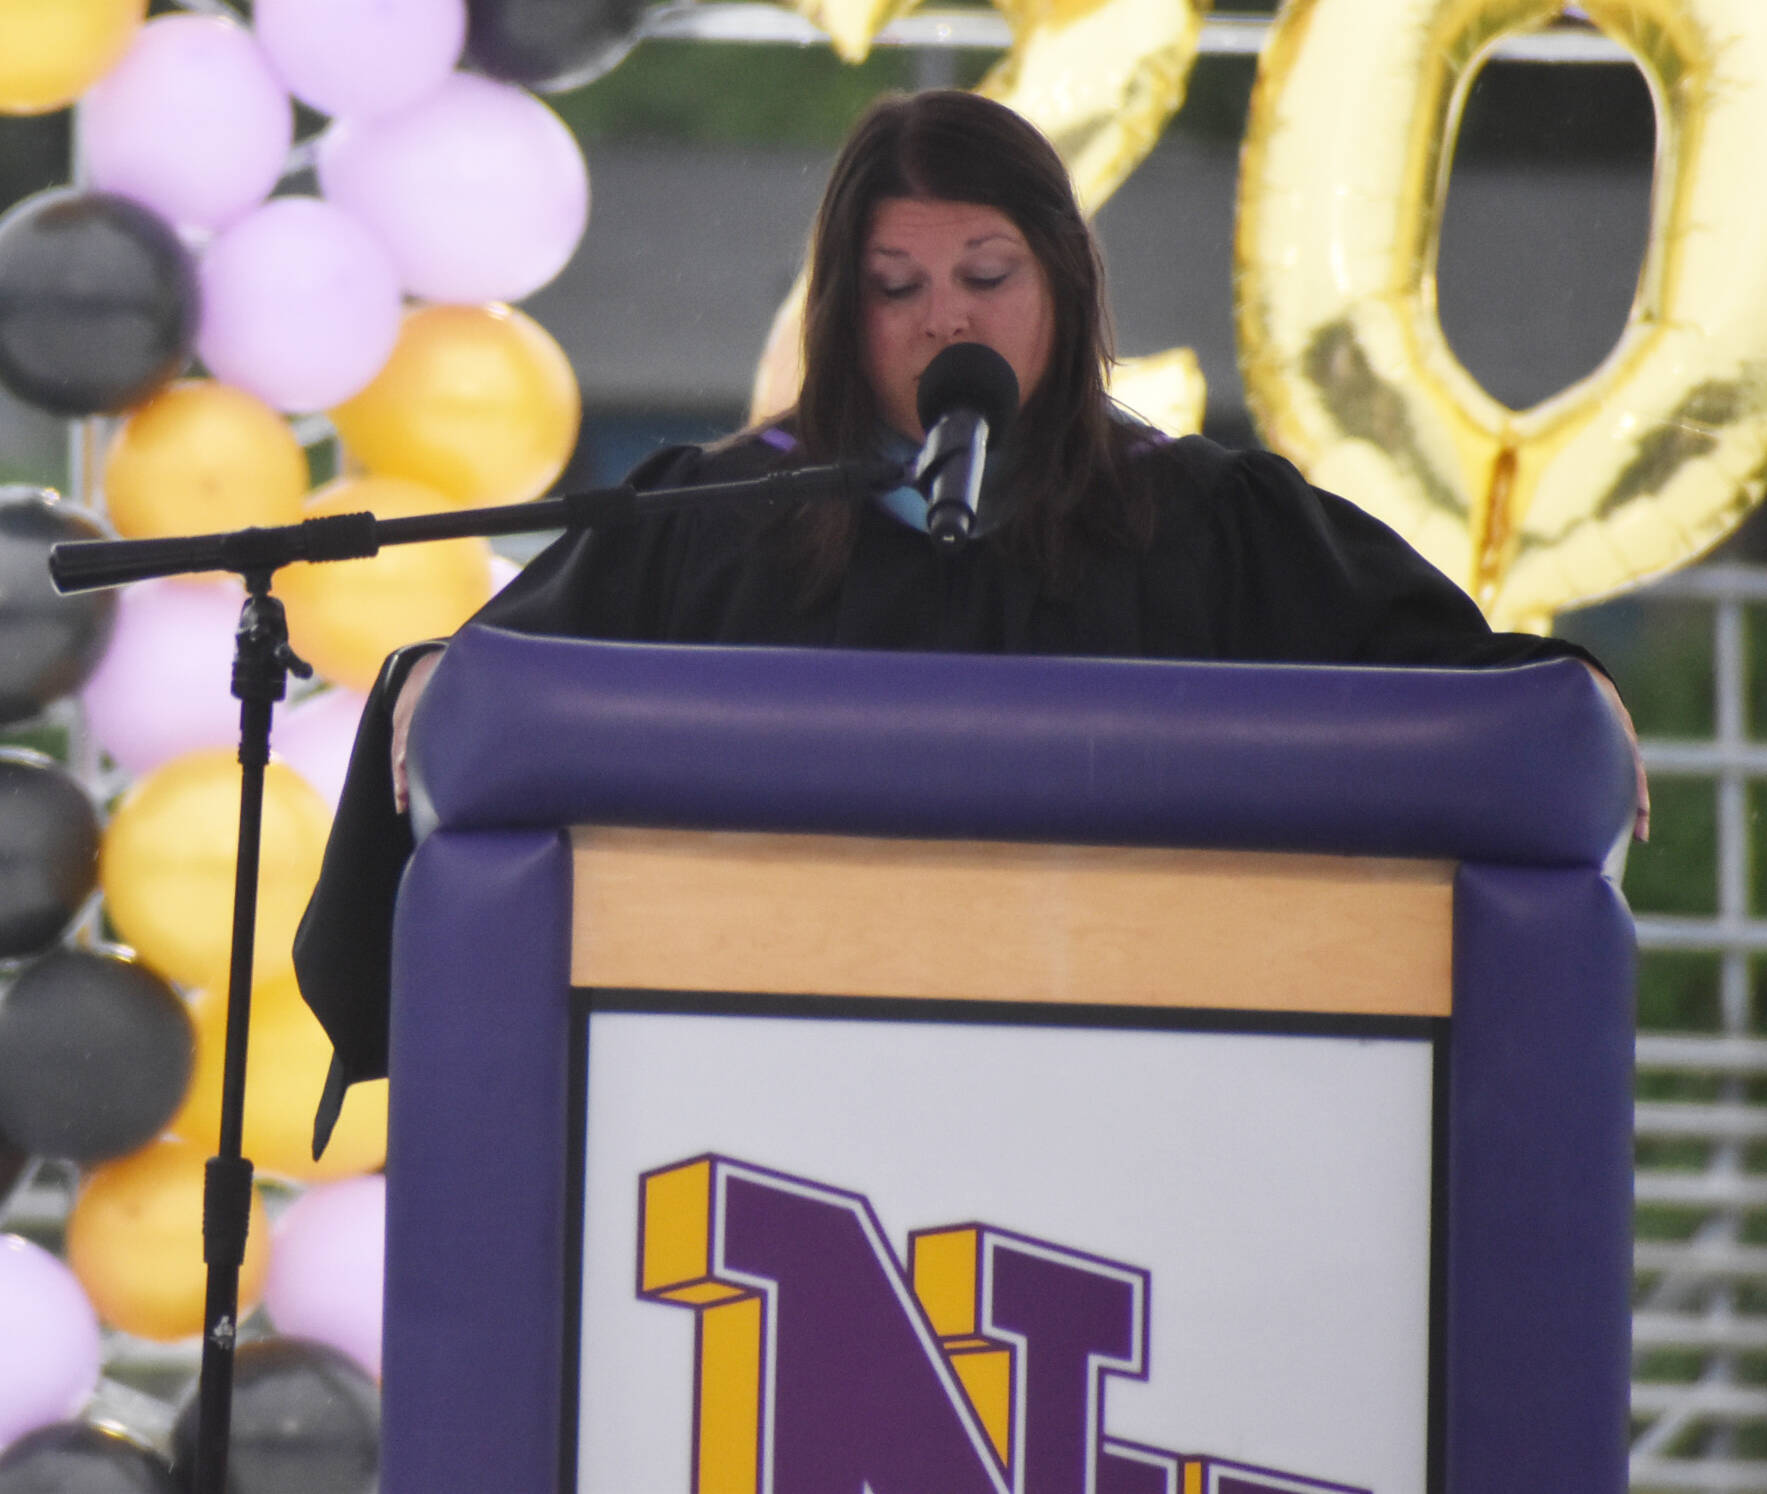 Megan Sawicki describes this class as unique based on being the 100th graduating class in NK.